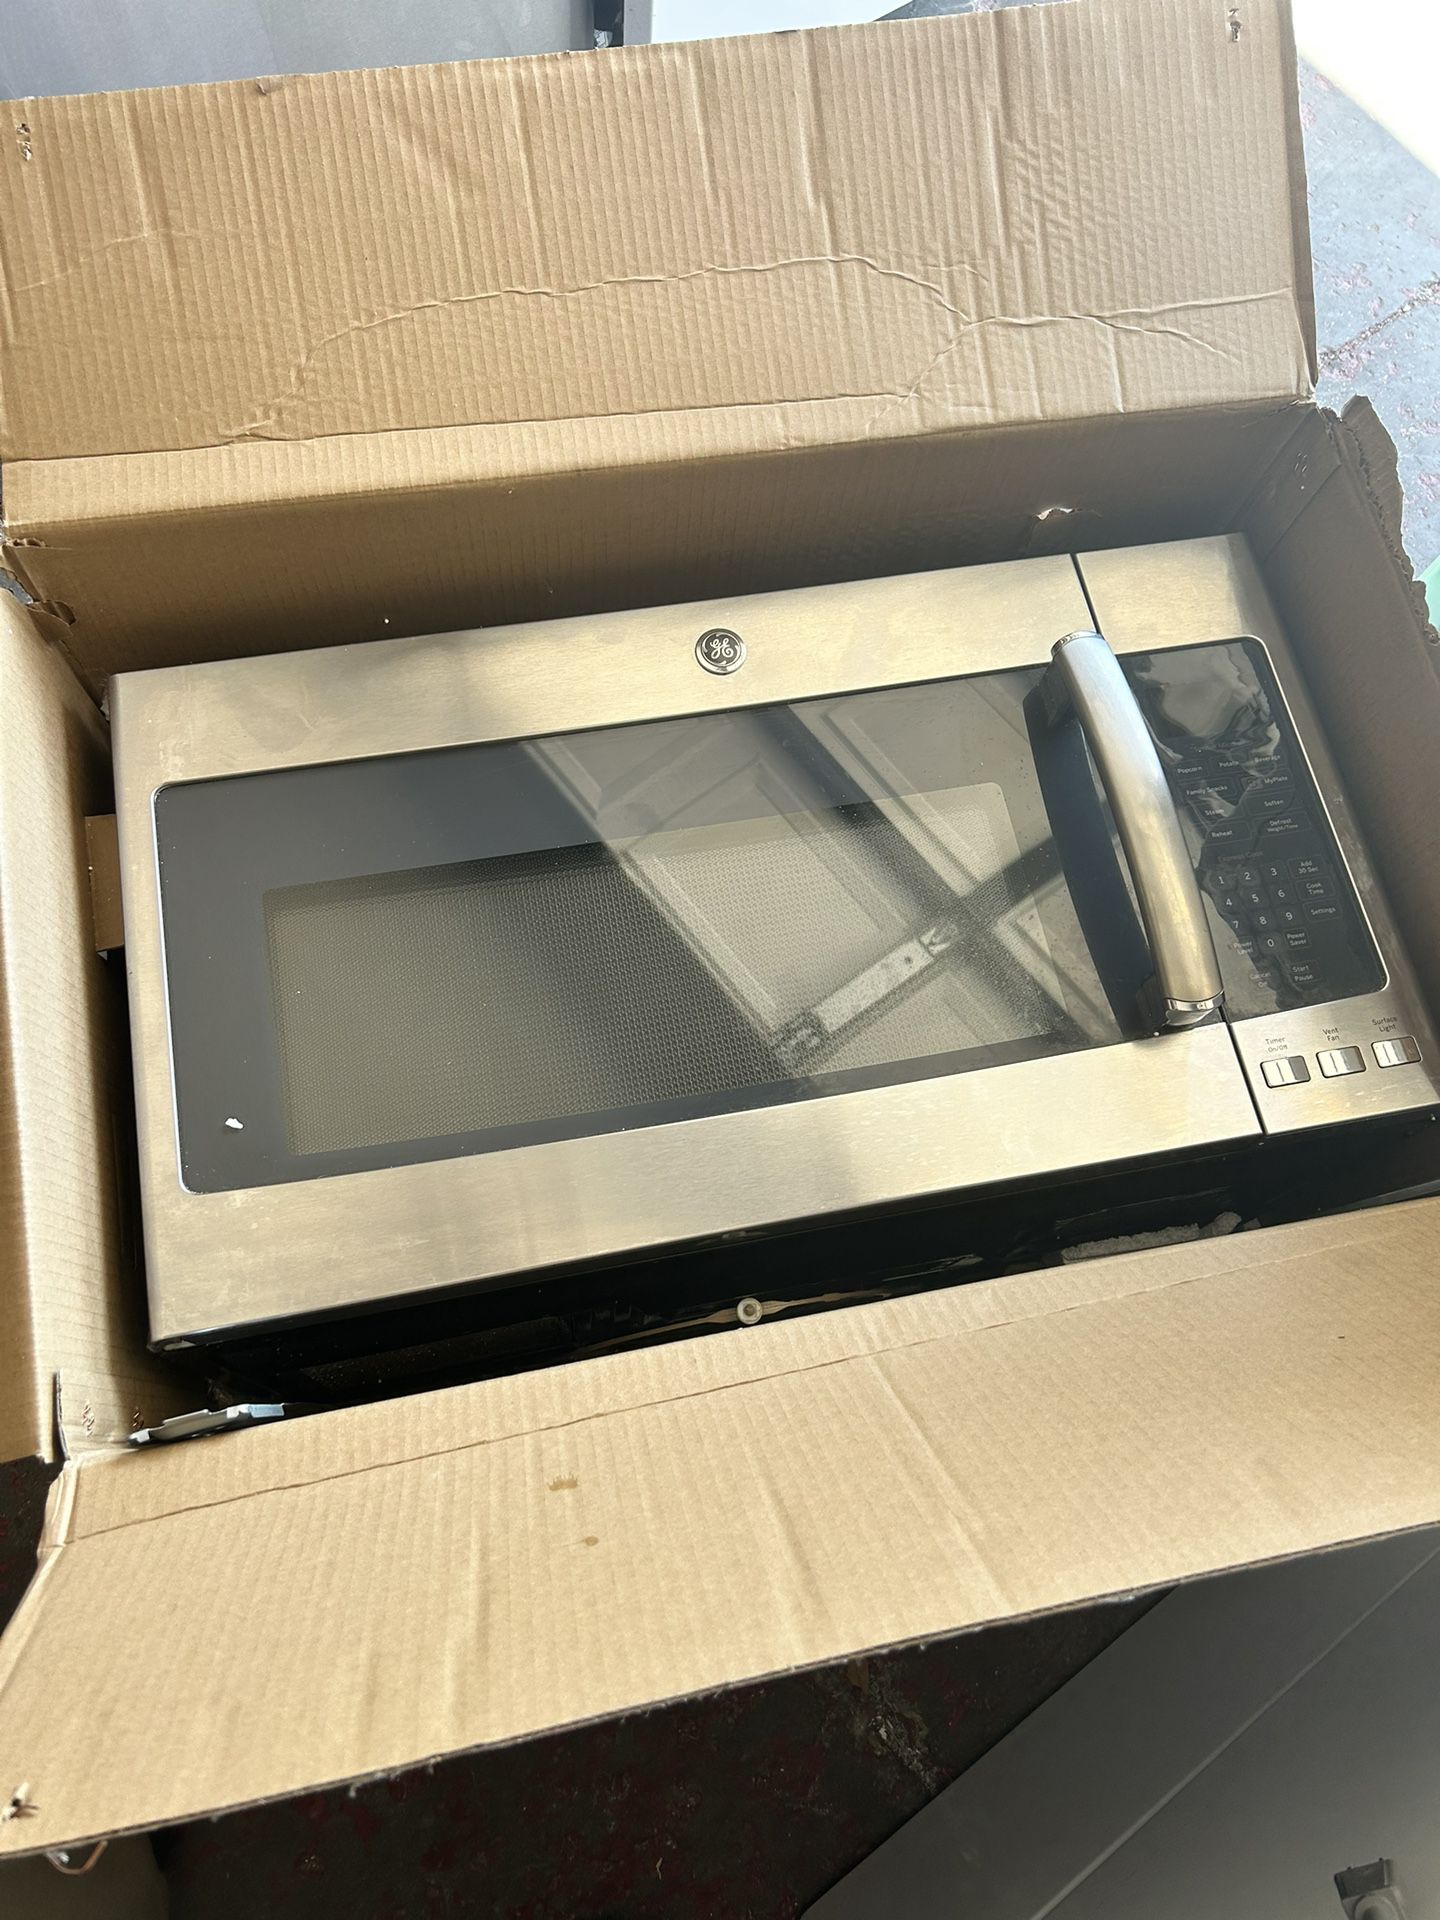 Stainless Steel Ge Over The Range Microwave